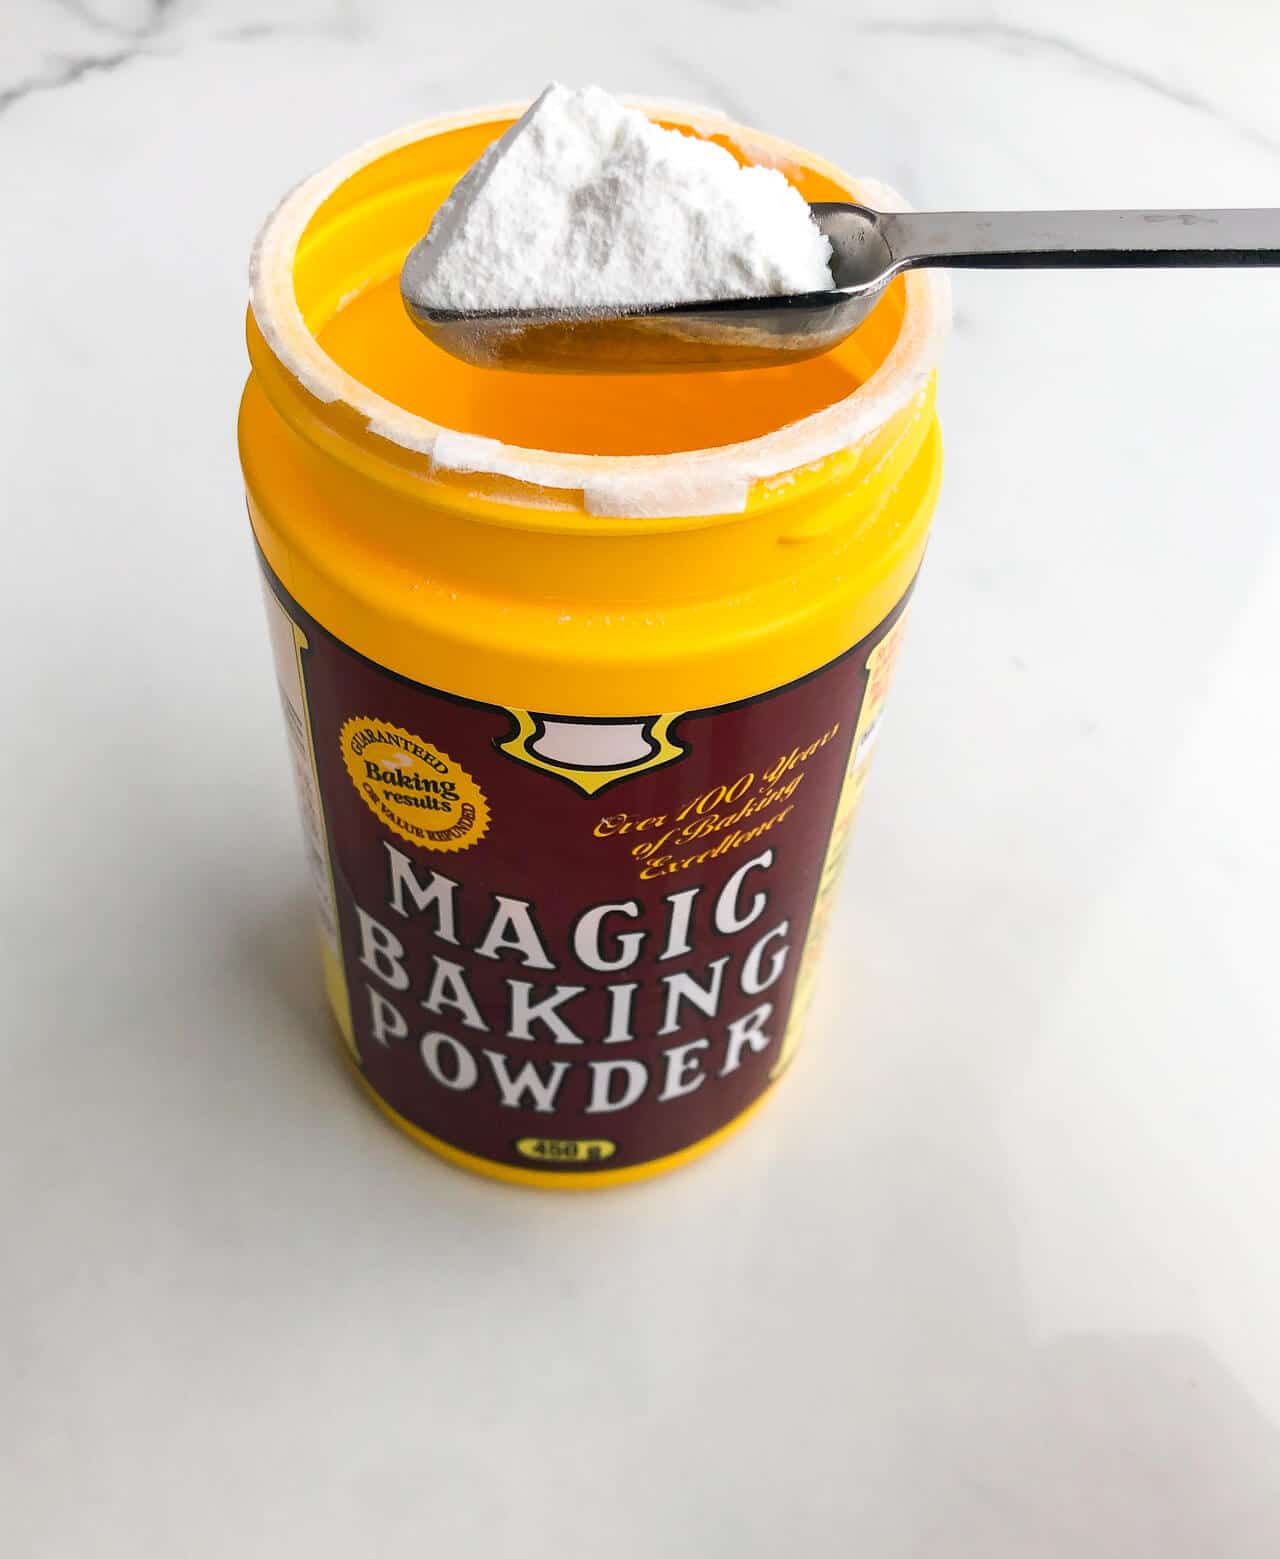 a yellow plastic container of Magic baking powder with 1 teaspoon scooped